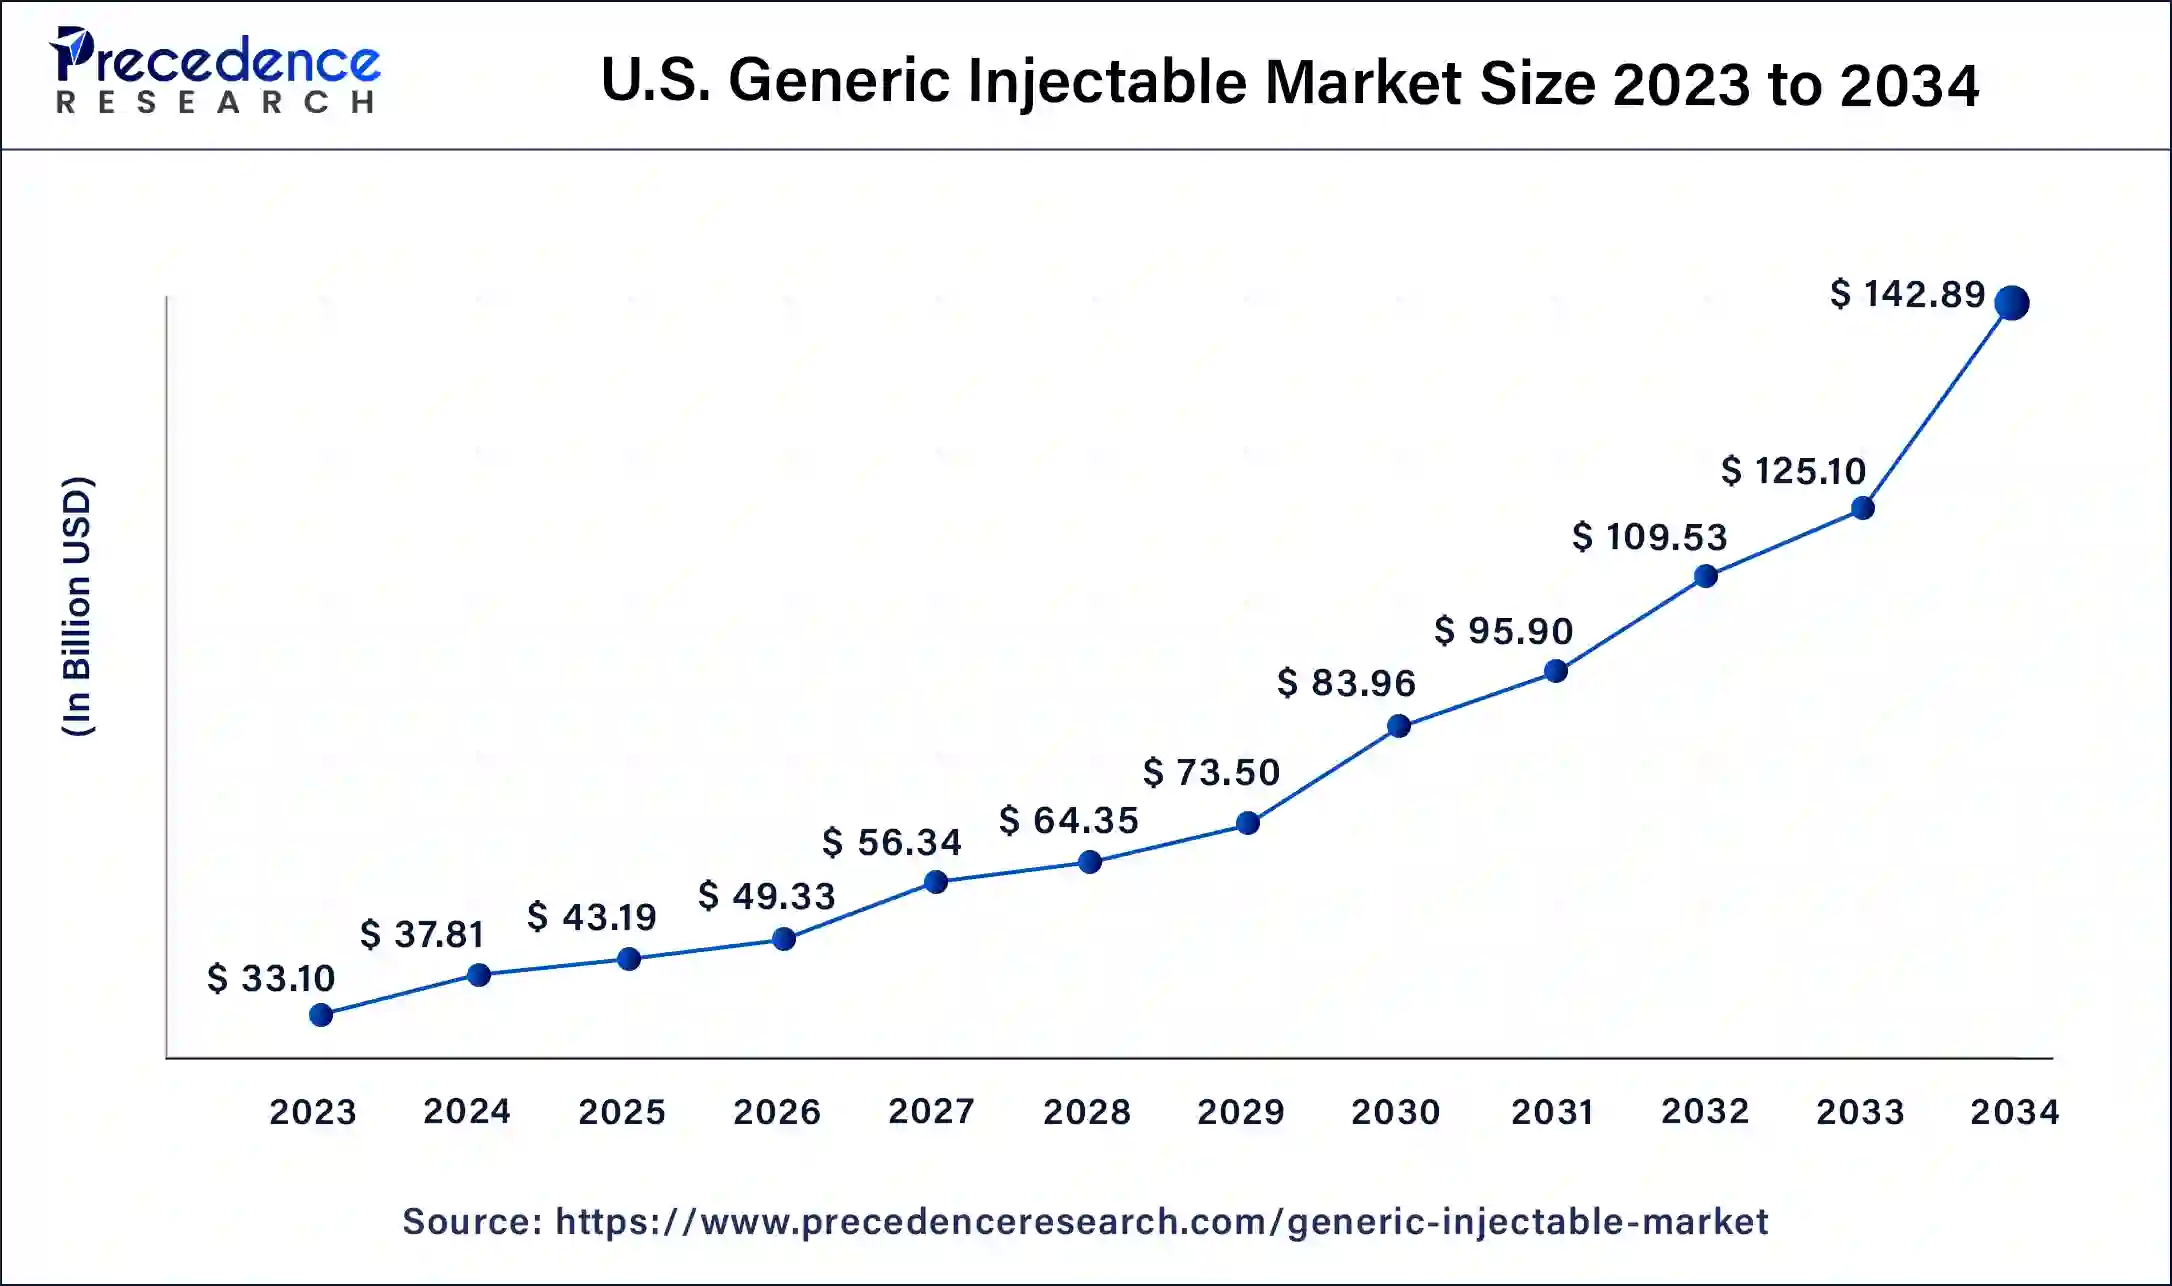 U.S. Generic Injectable Market Size 2024 to 2034